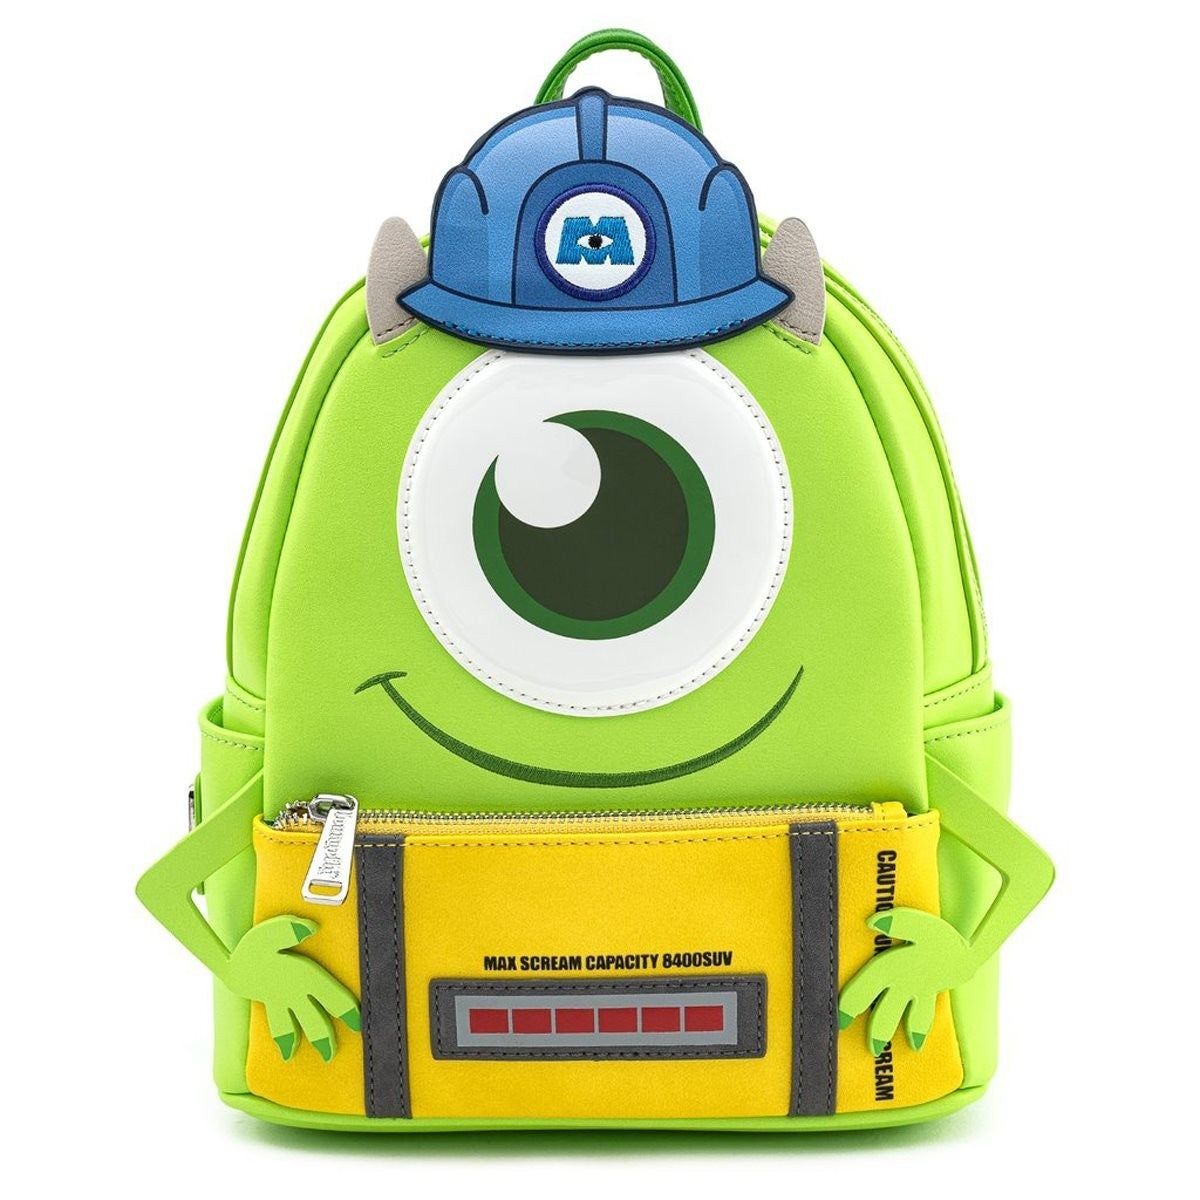  Loungefly Disney Pixar Monsters Inc Boo Mike Sully